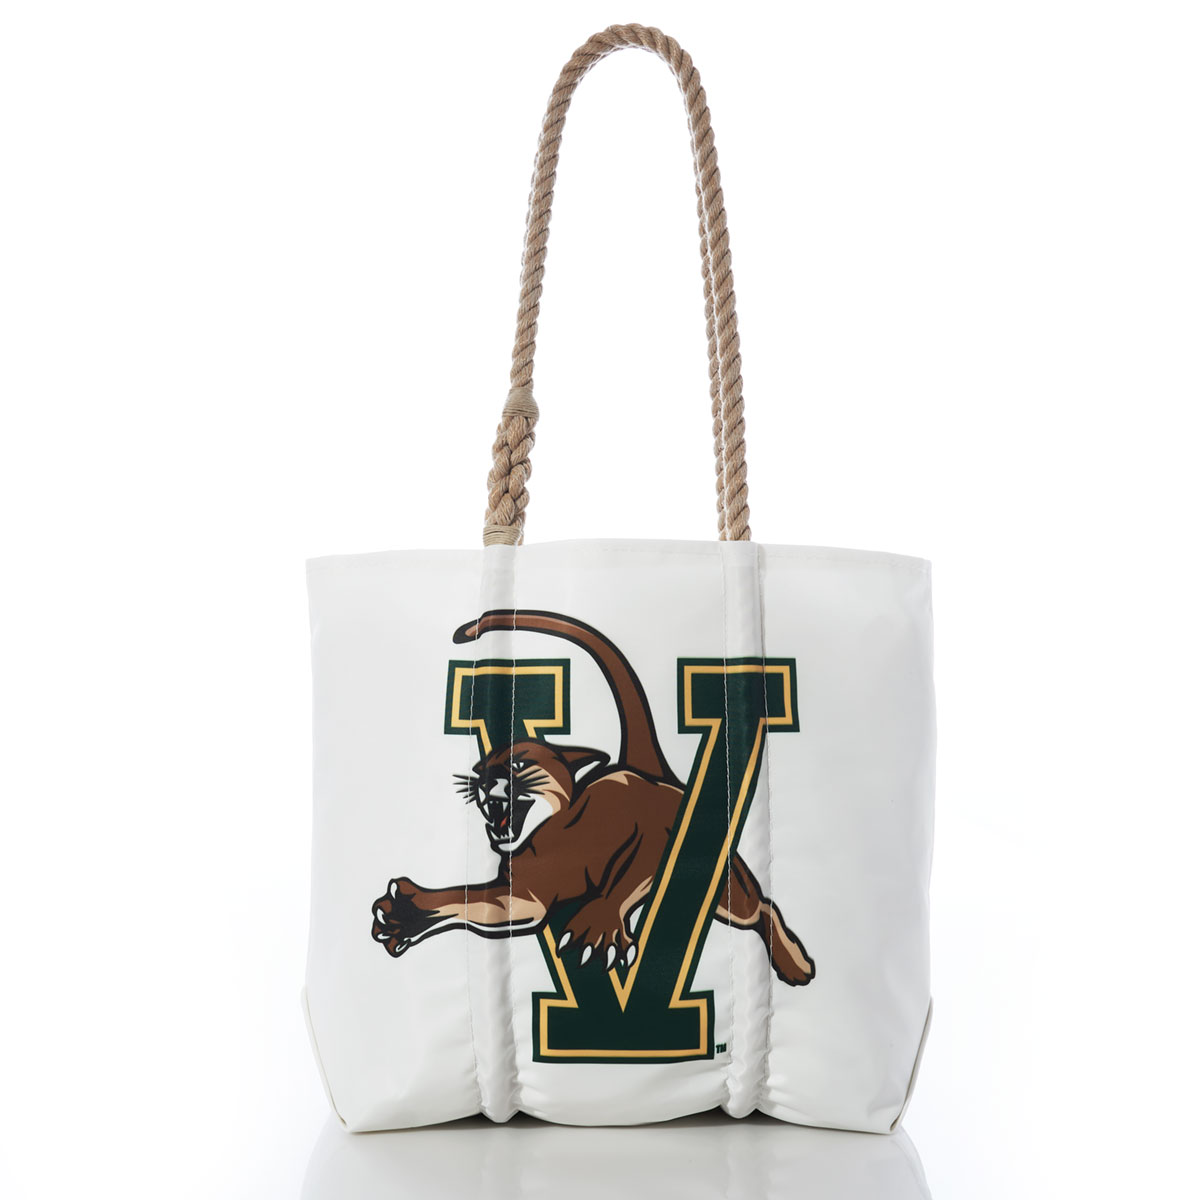 a white recycled sail cloth tote with hemp rope handles is printed with the University of Vermont logo in green